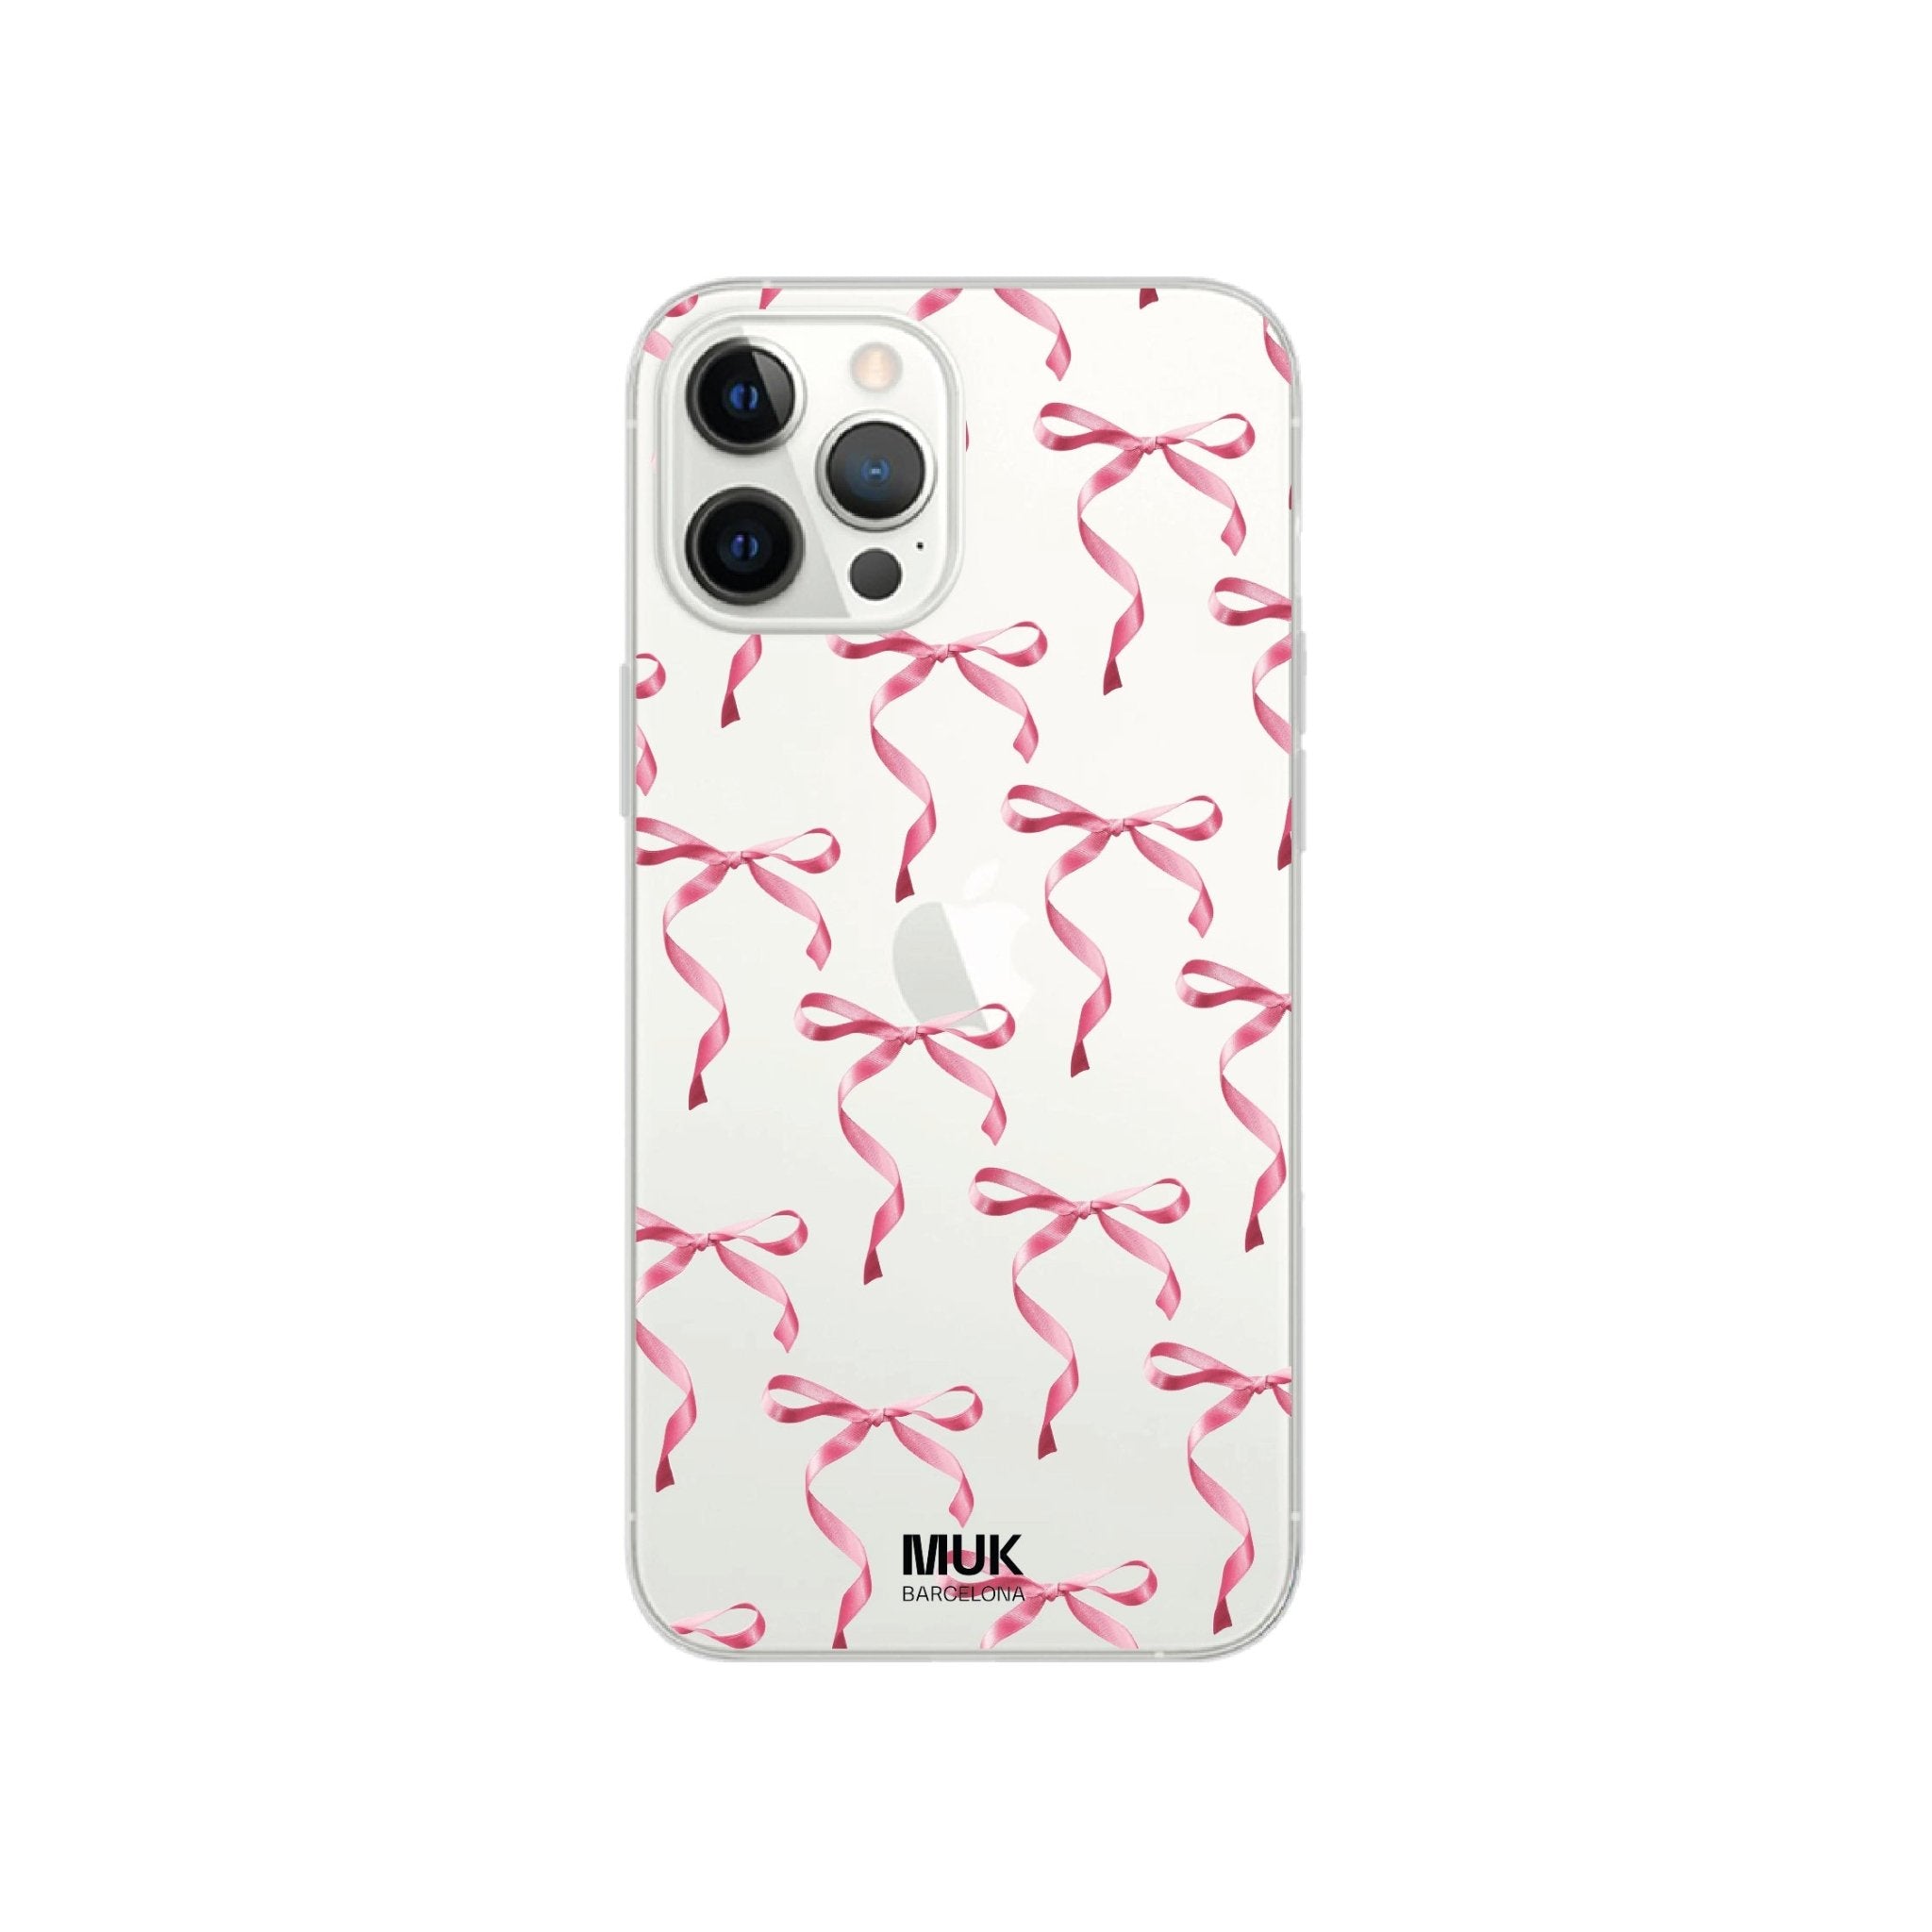 Clear TPU cell phone case with repeating pink bow print.
